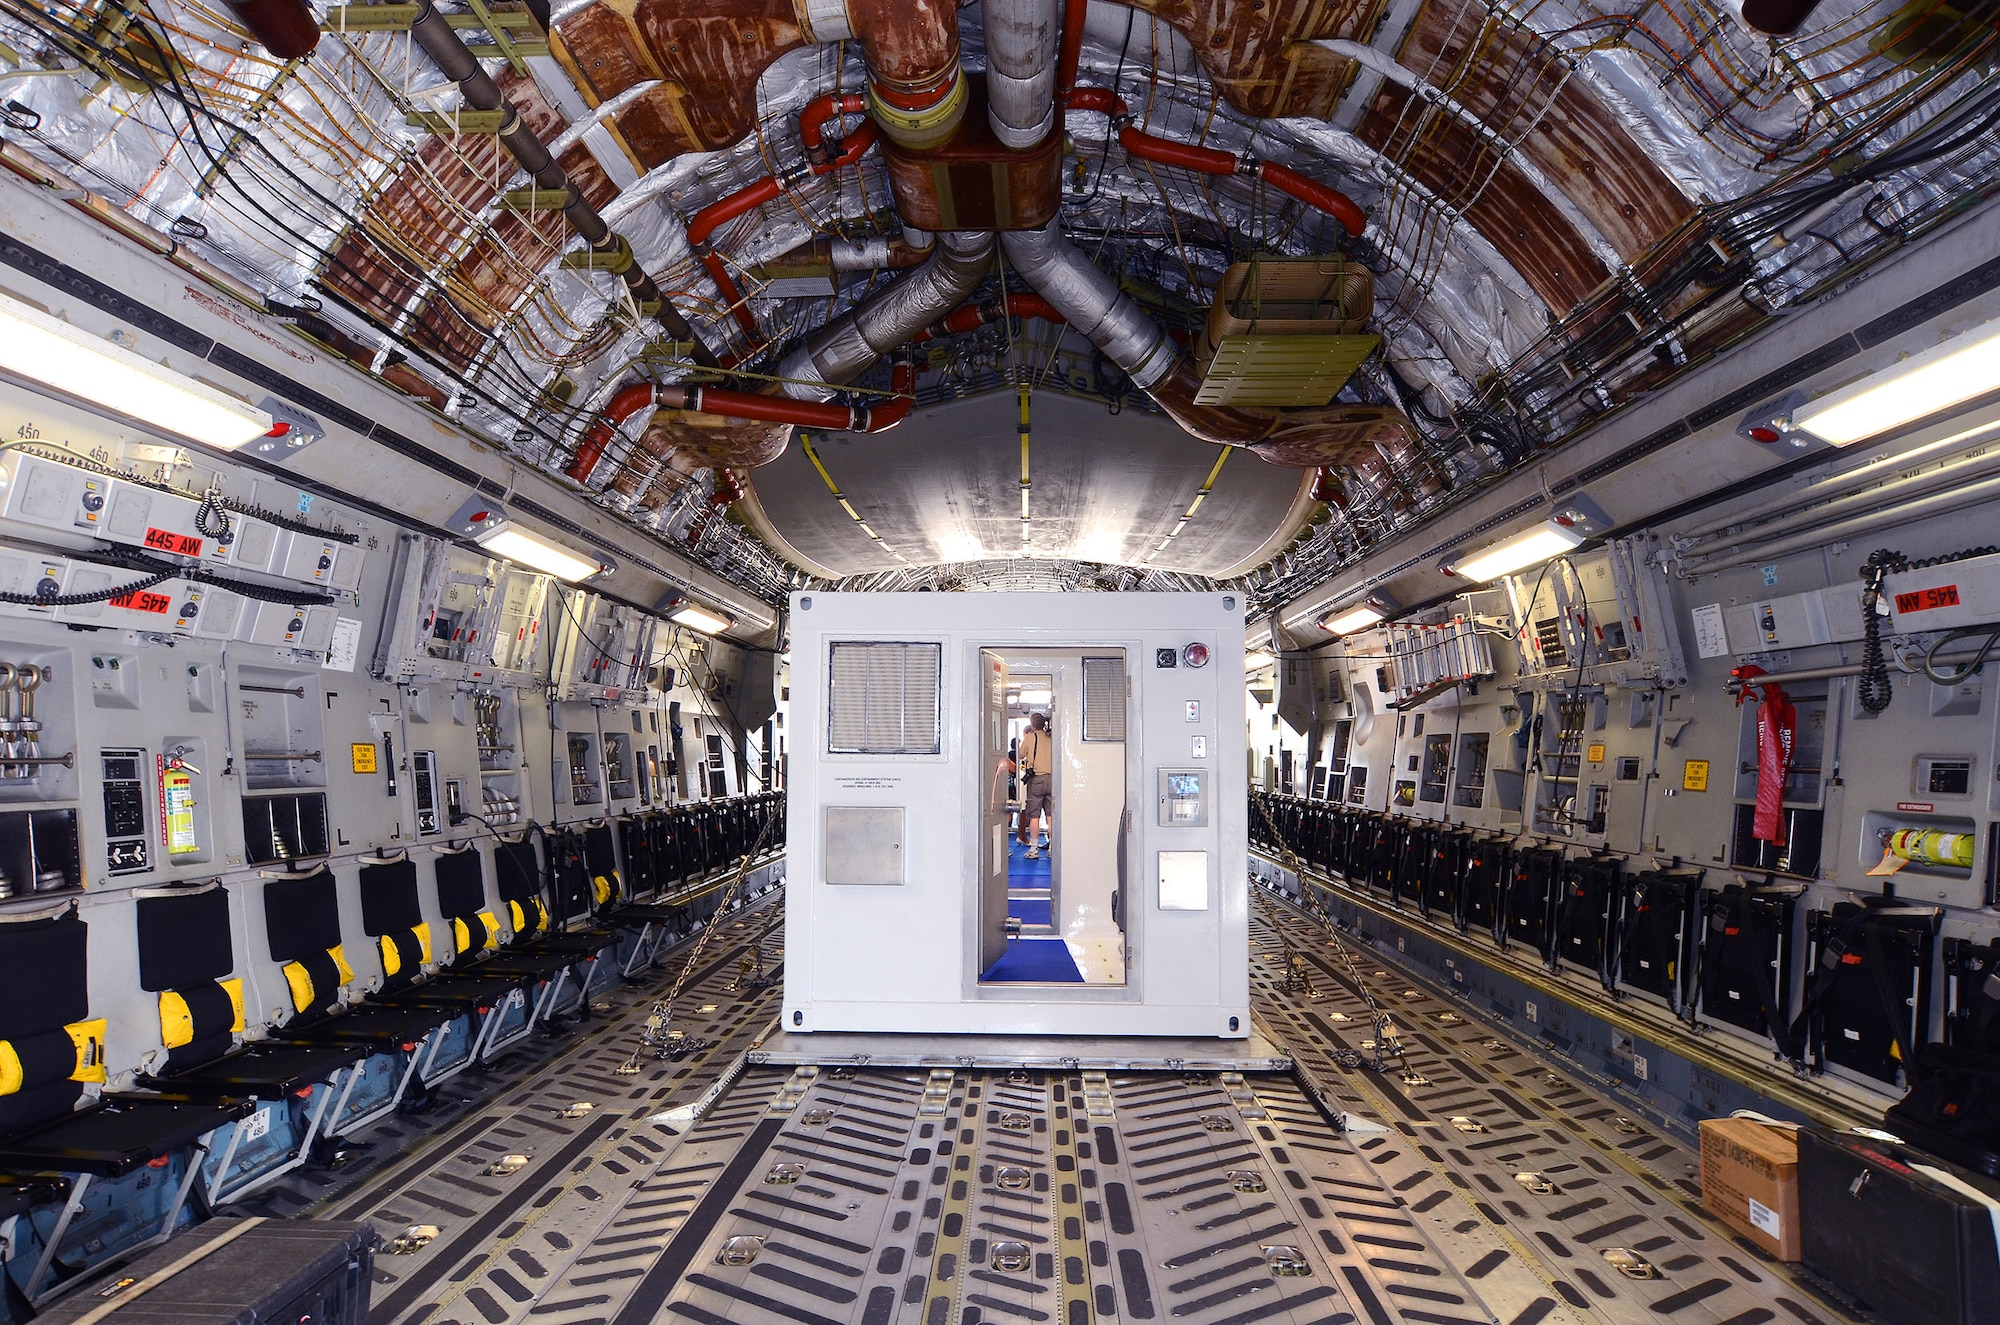 The second Containerized Biocontainment Systems unit is positioned on a U.S. Air Force C-17 to show how the unit could be airlifted to anywhere in the world if needed; Dobbins Air Reserve Base, Ga., Aug. 11, 2015. The two Containerized Biocontainment units built by MRIGlobal through a partnership with the U.S. State Dept. and the Paul G. Allen Ebola Program, will be positioned at Dobbins ARB, ready for future. (U.S. Air Force photo/ Brad Fallin)